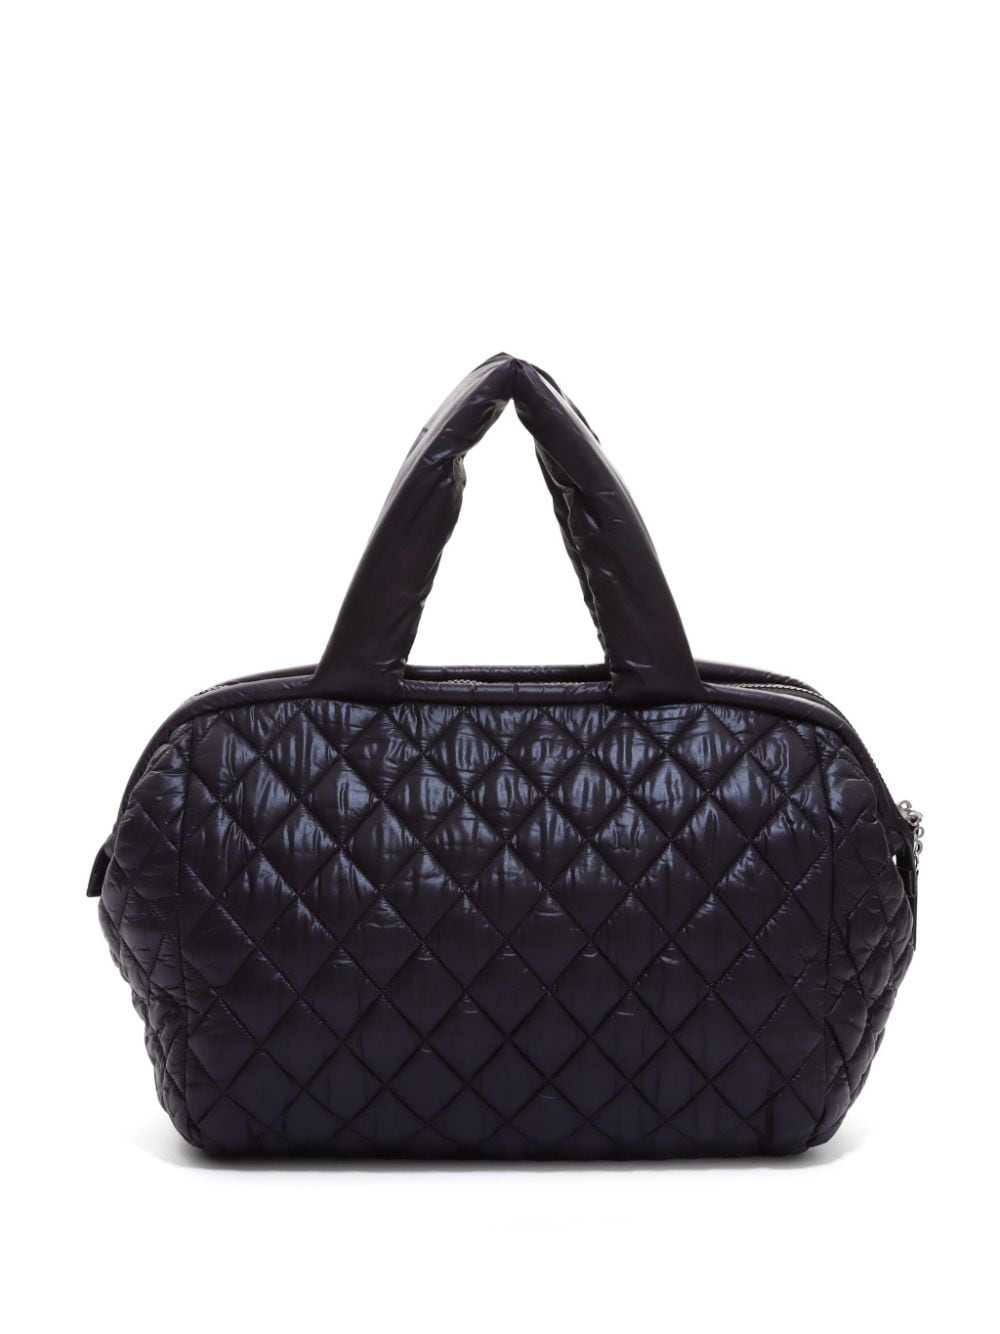 CHANEL Pre-Owned 2012 Coco Cocoon tote bag - Black - image 2